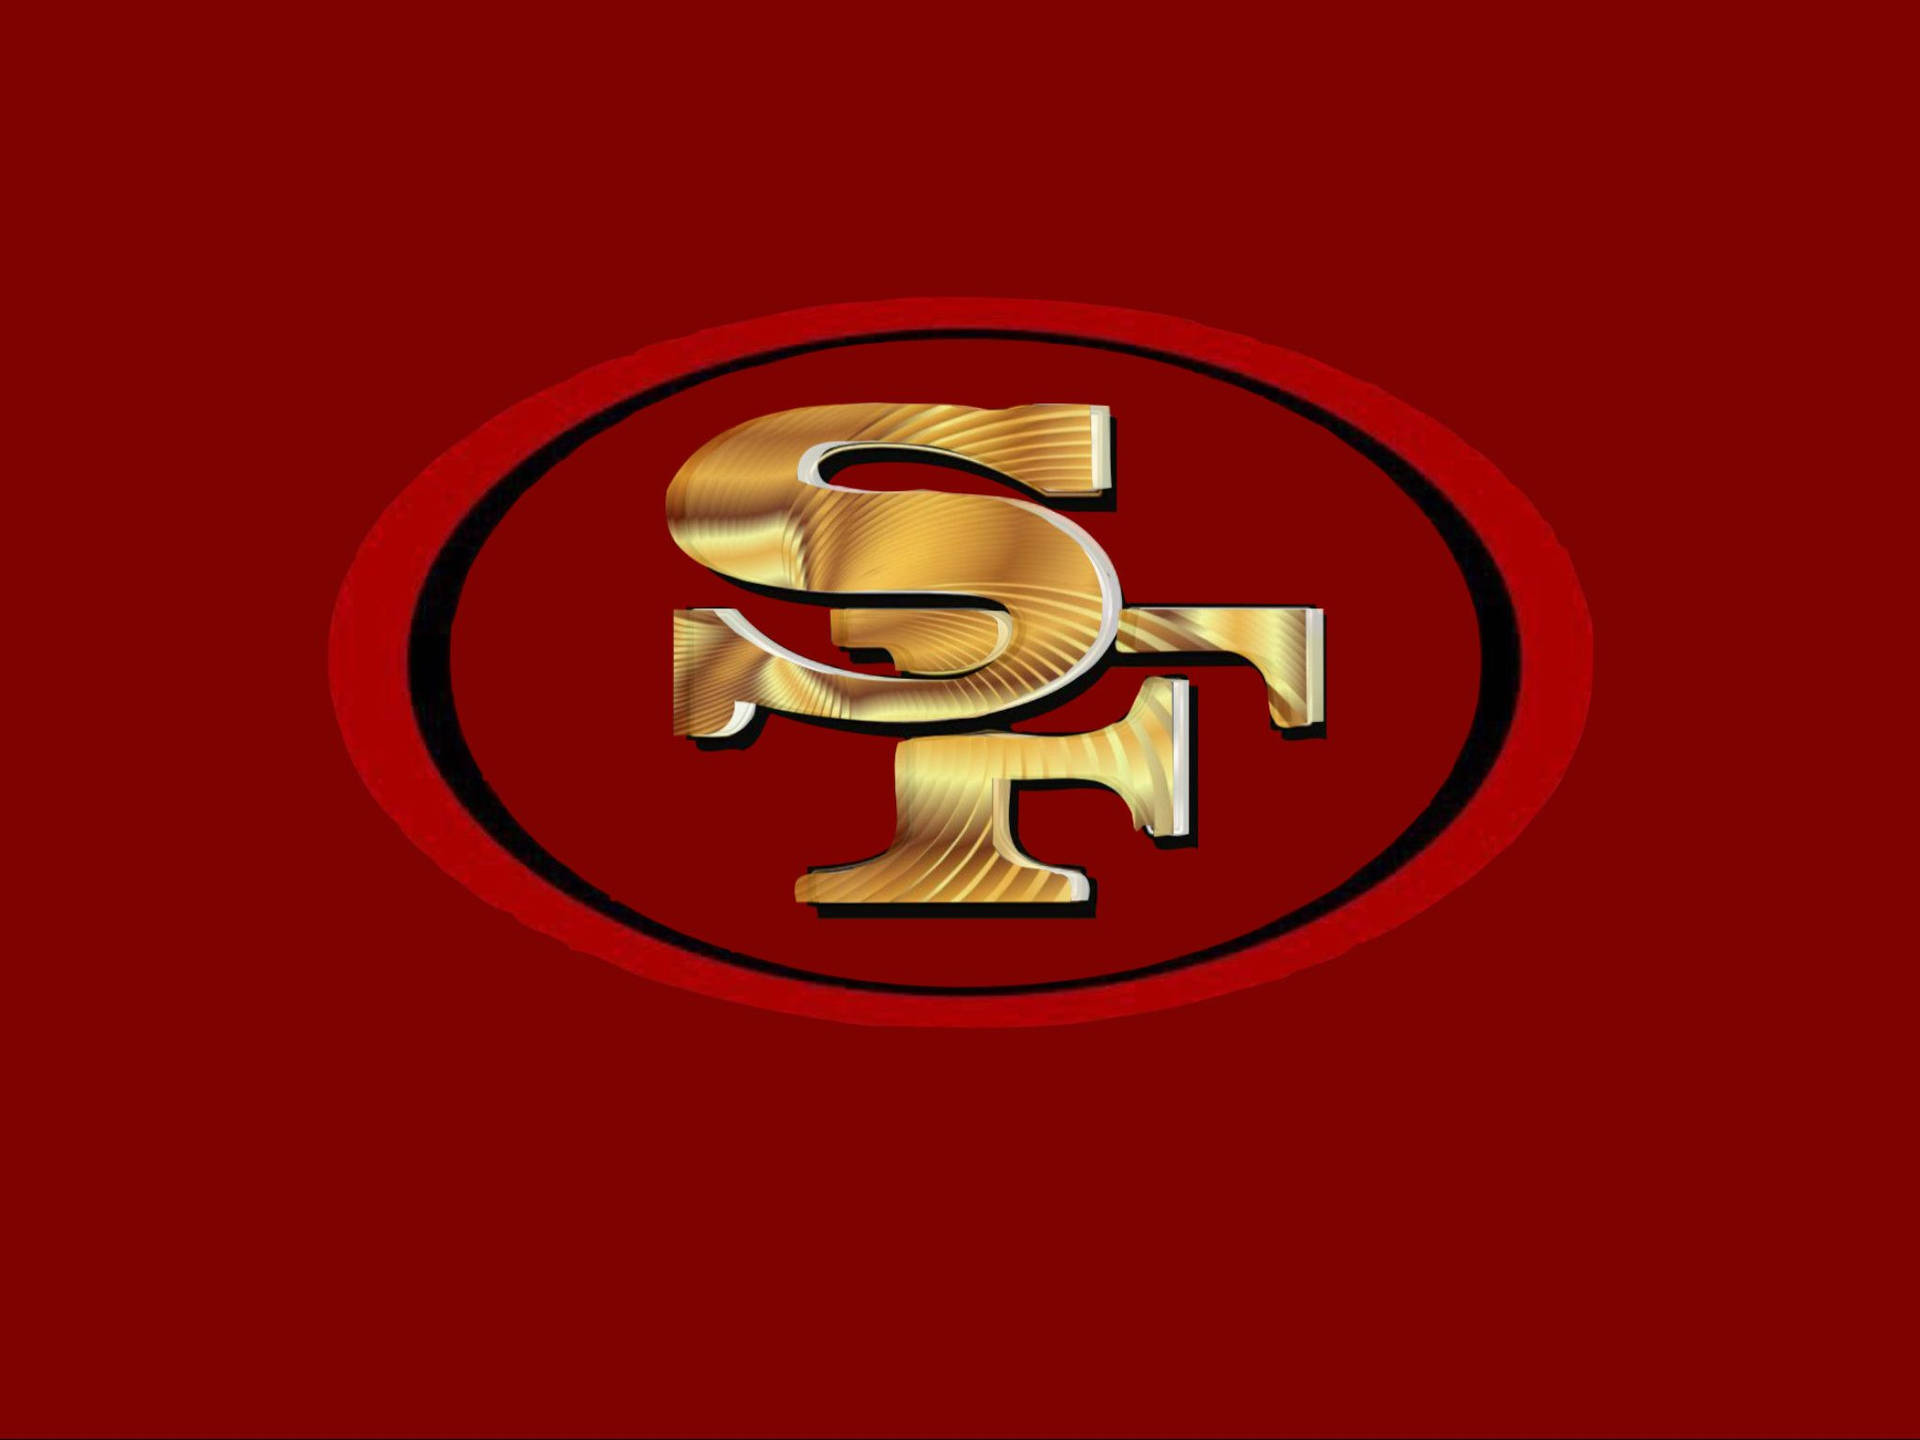 2048X1536 49Ers Wallpaper and Background